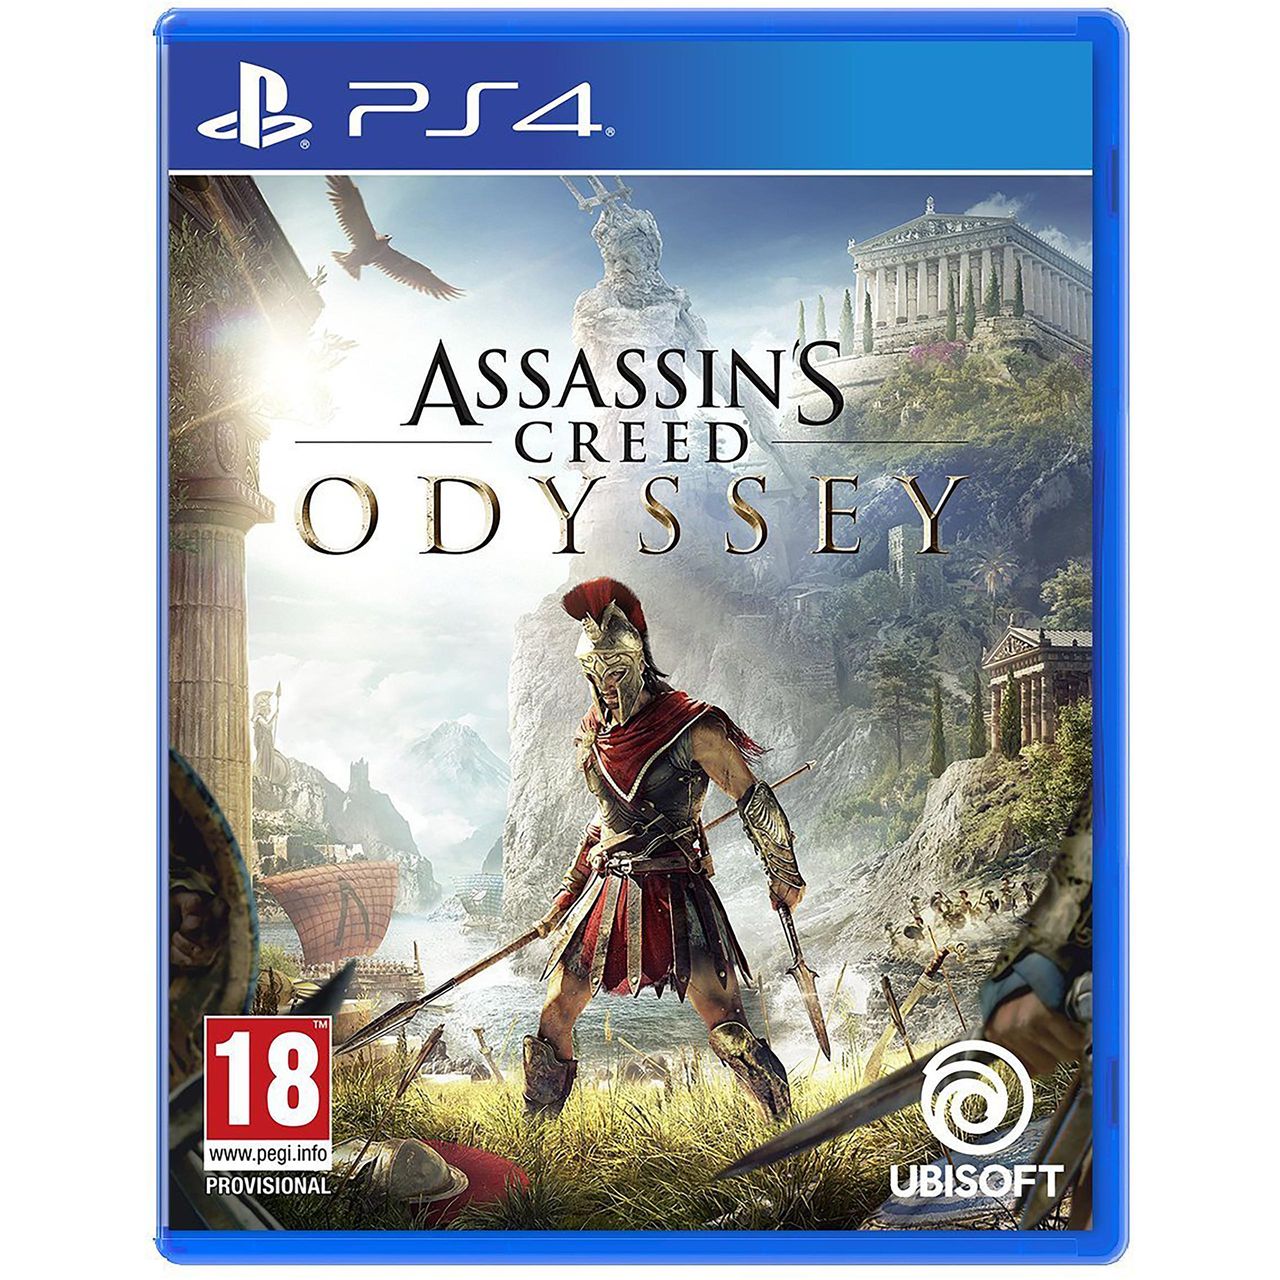 Assassins Creed Odyssey for PlayStation 4 Review